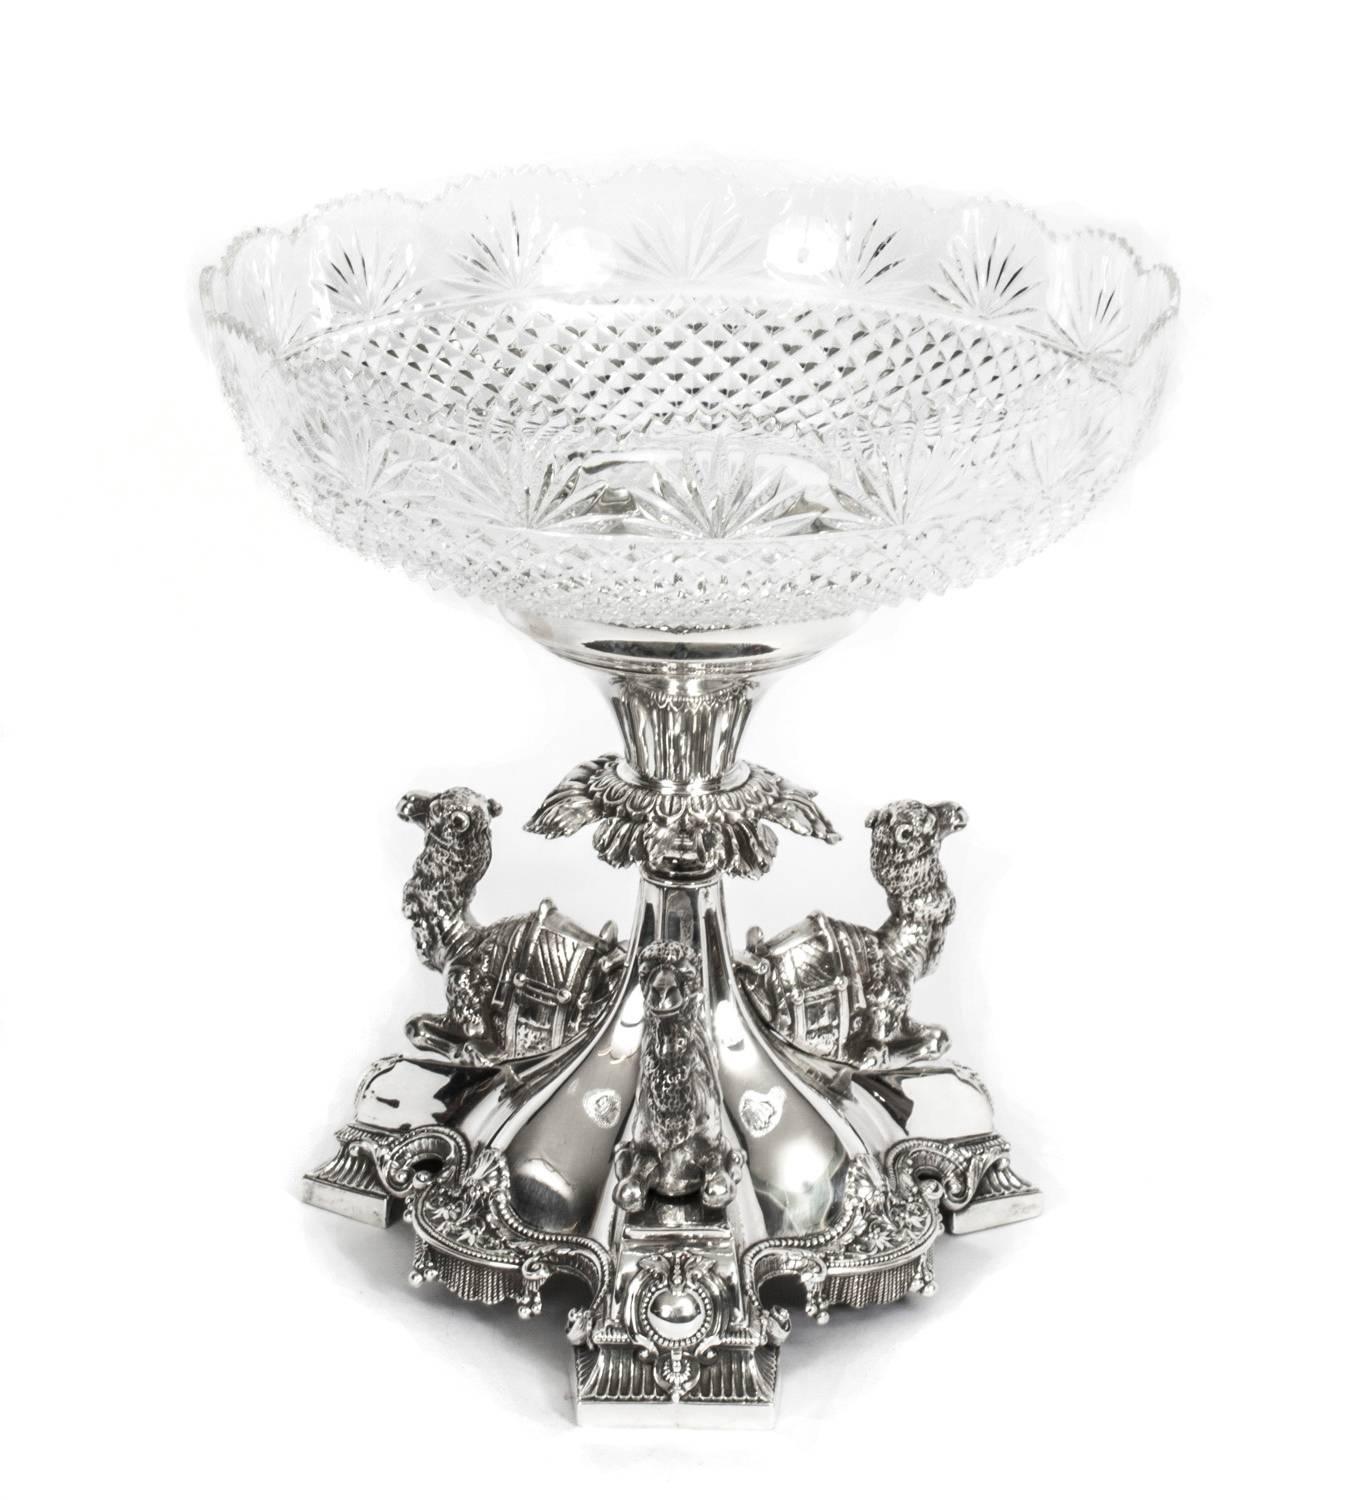 This is an exquisite antique silver plated Victorian centrepiece probably by the renowned silversmiths Elkington & Co, circa 1880 in date.

There is no mistaking the unique quality and design of this gorgeous centrepiece which features an